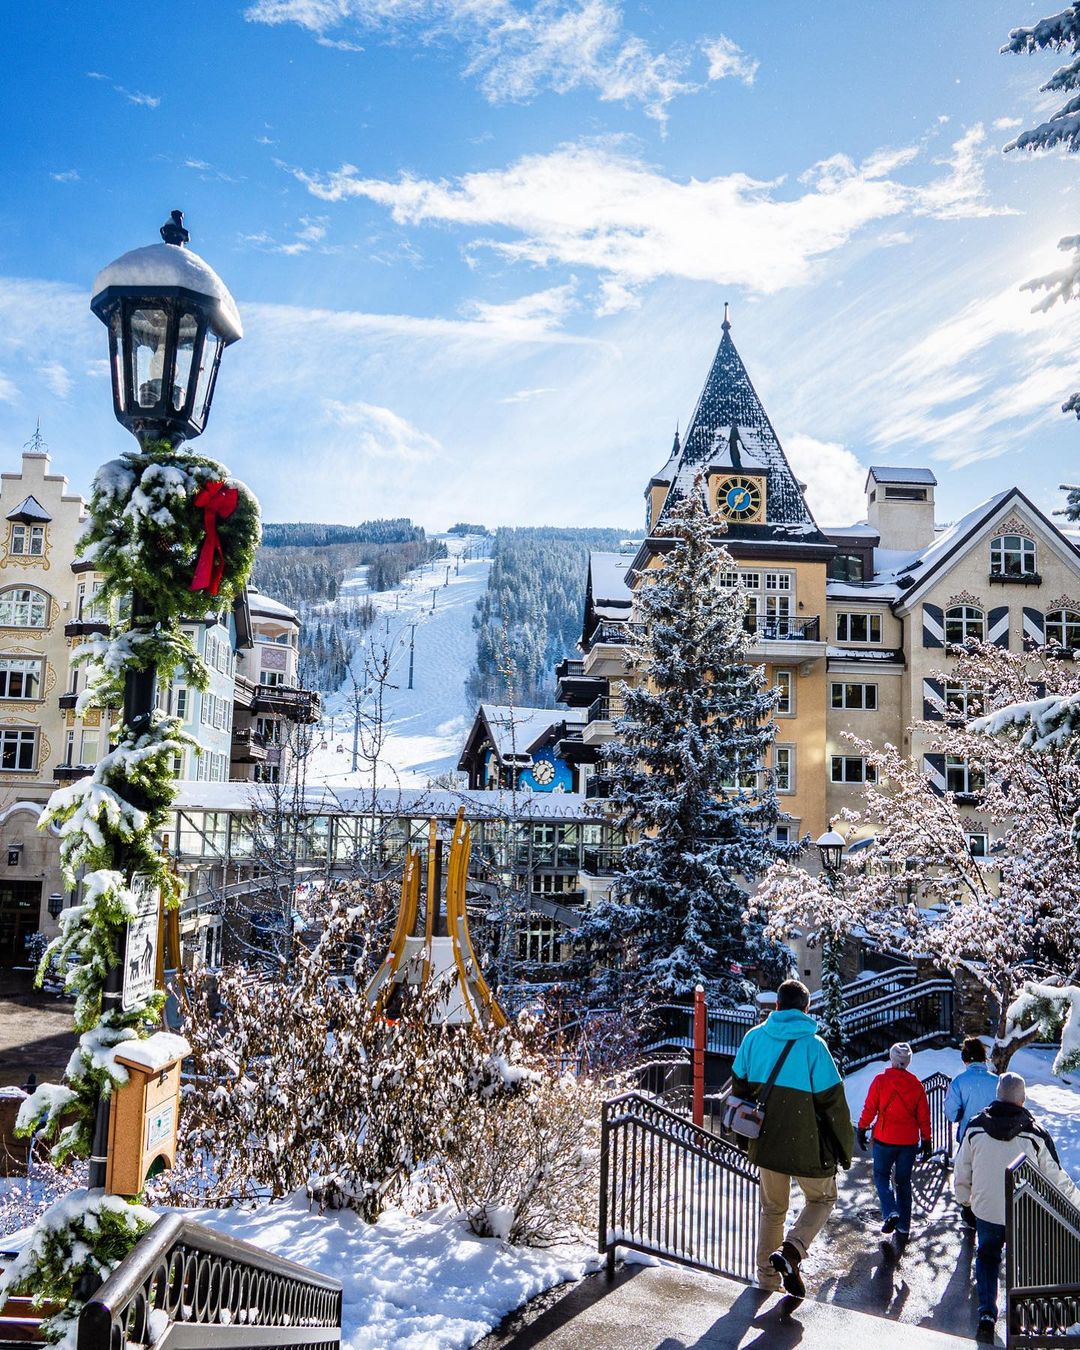 Downtown vail in the wintertime with holiday season decor and a ski slope with snowy roofs and people walking. Photo by instagram user @beyondtheblueridge